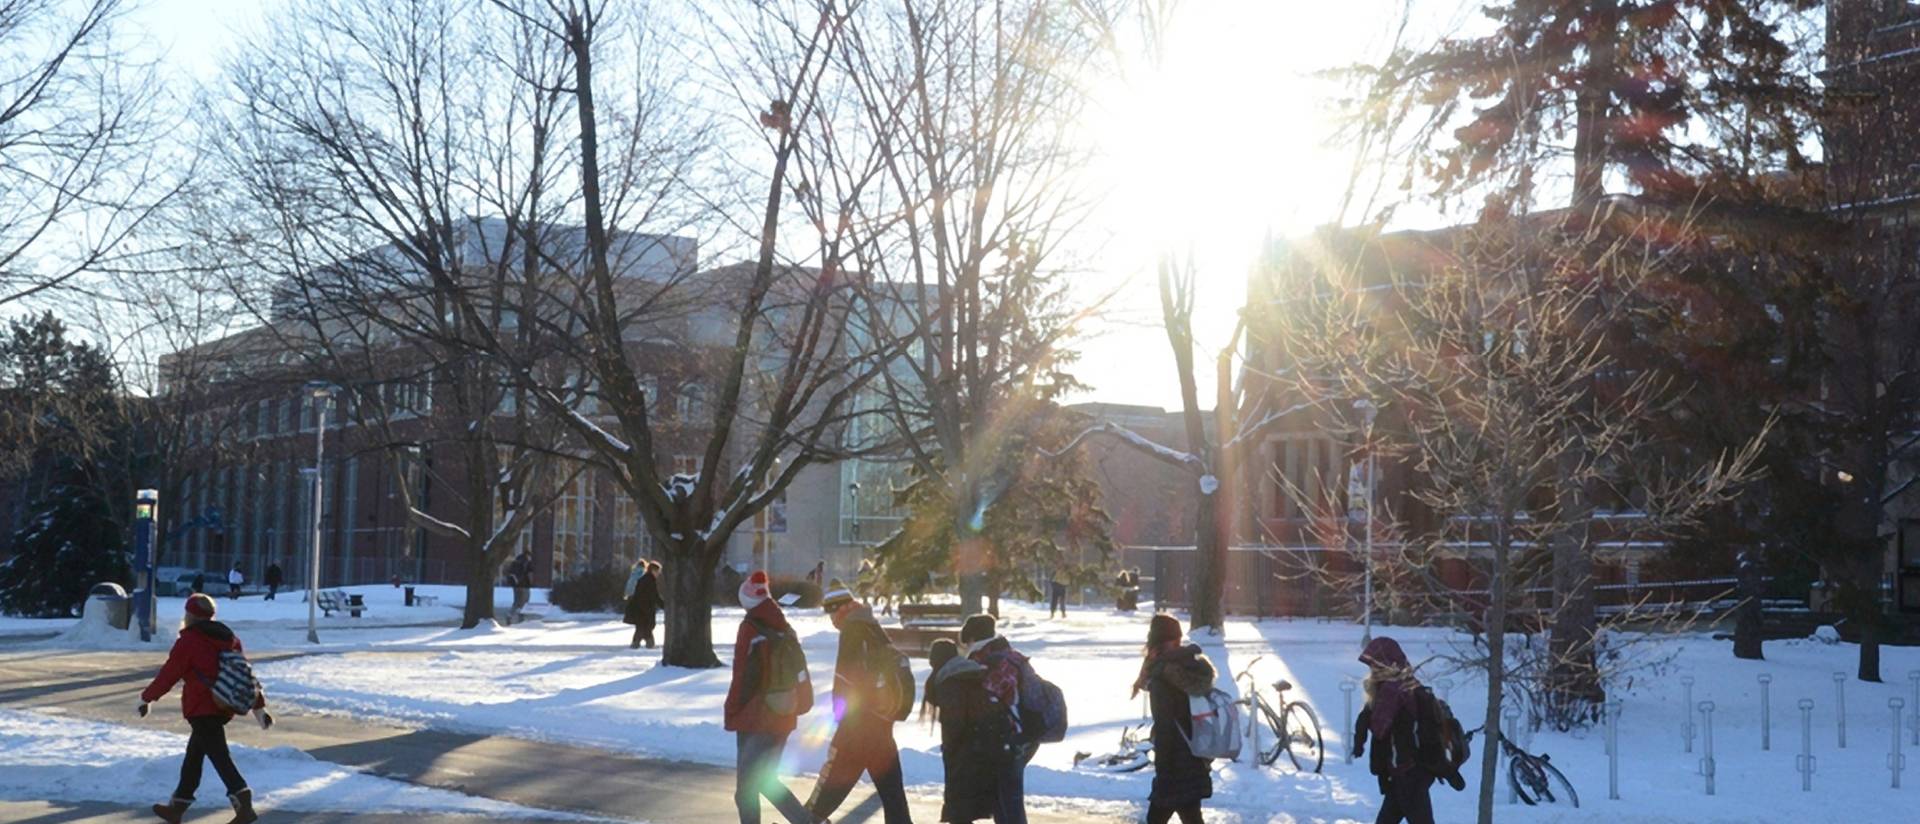 Students walking on campus in winter.